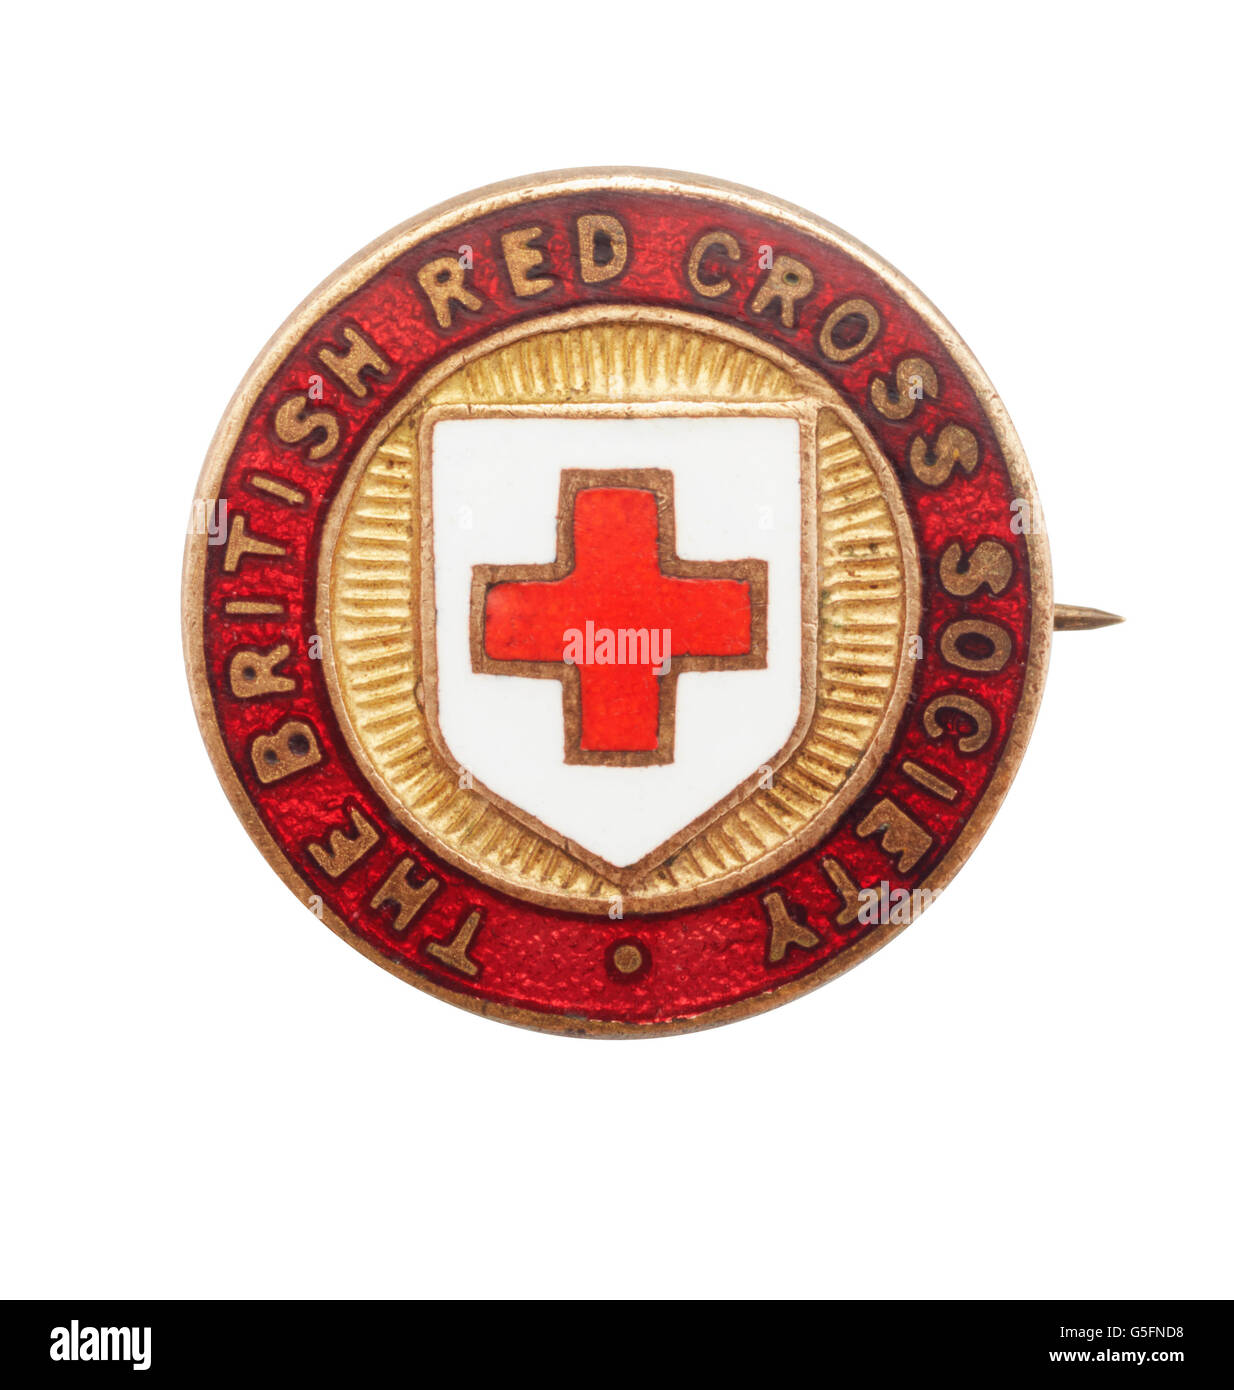 La British Red Cross Society badge guerre Banque D'Images